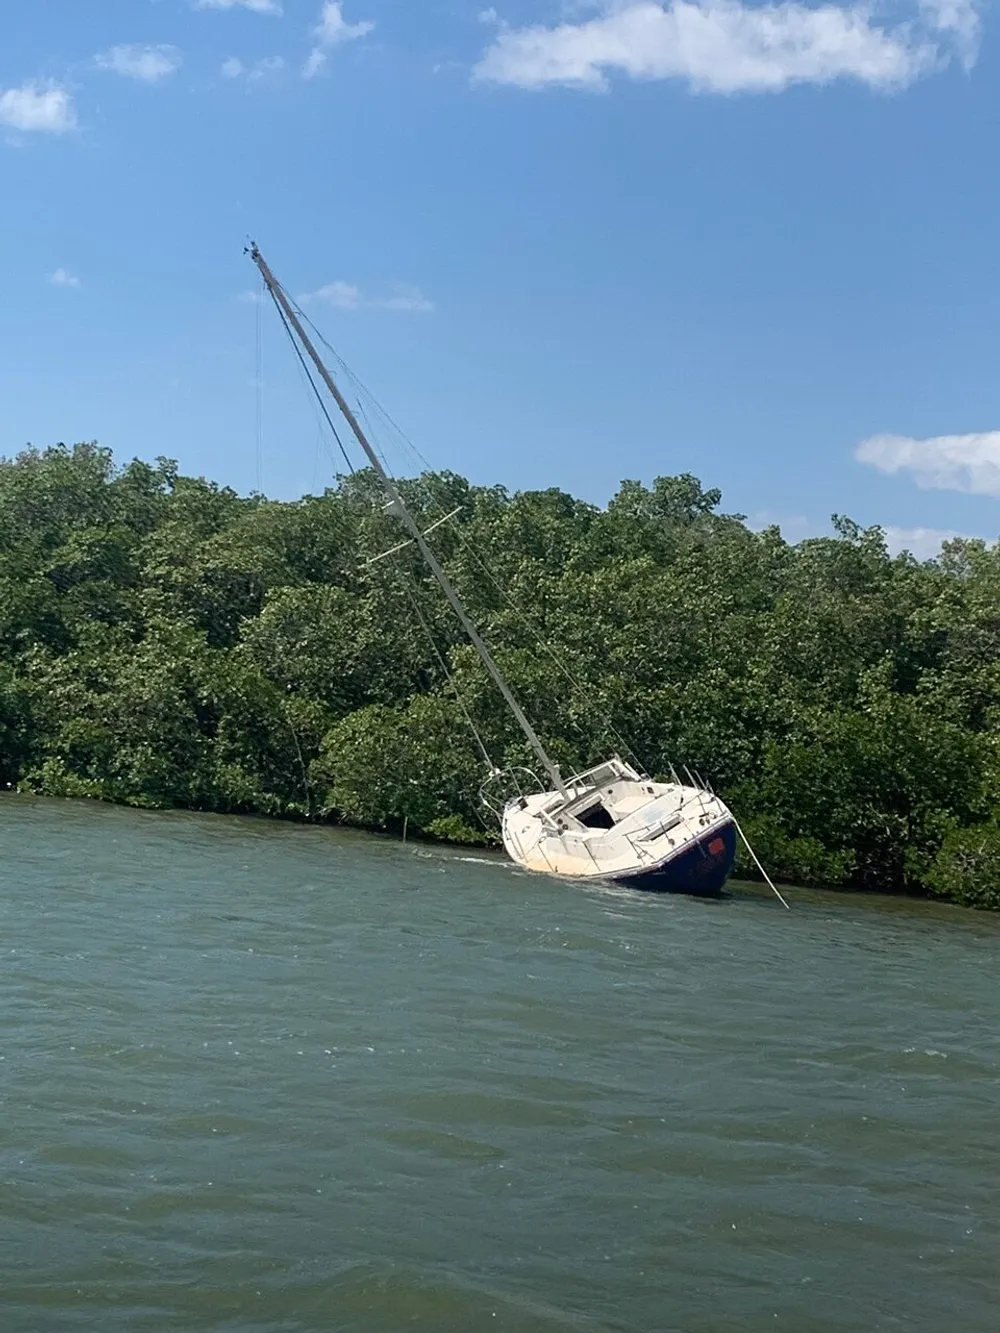 A sailboat is capsized and stranded among the mangroves near the waters edge